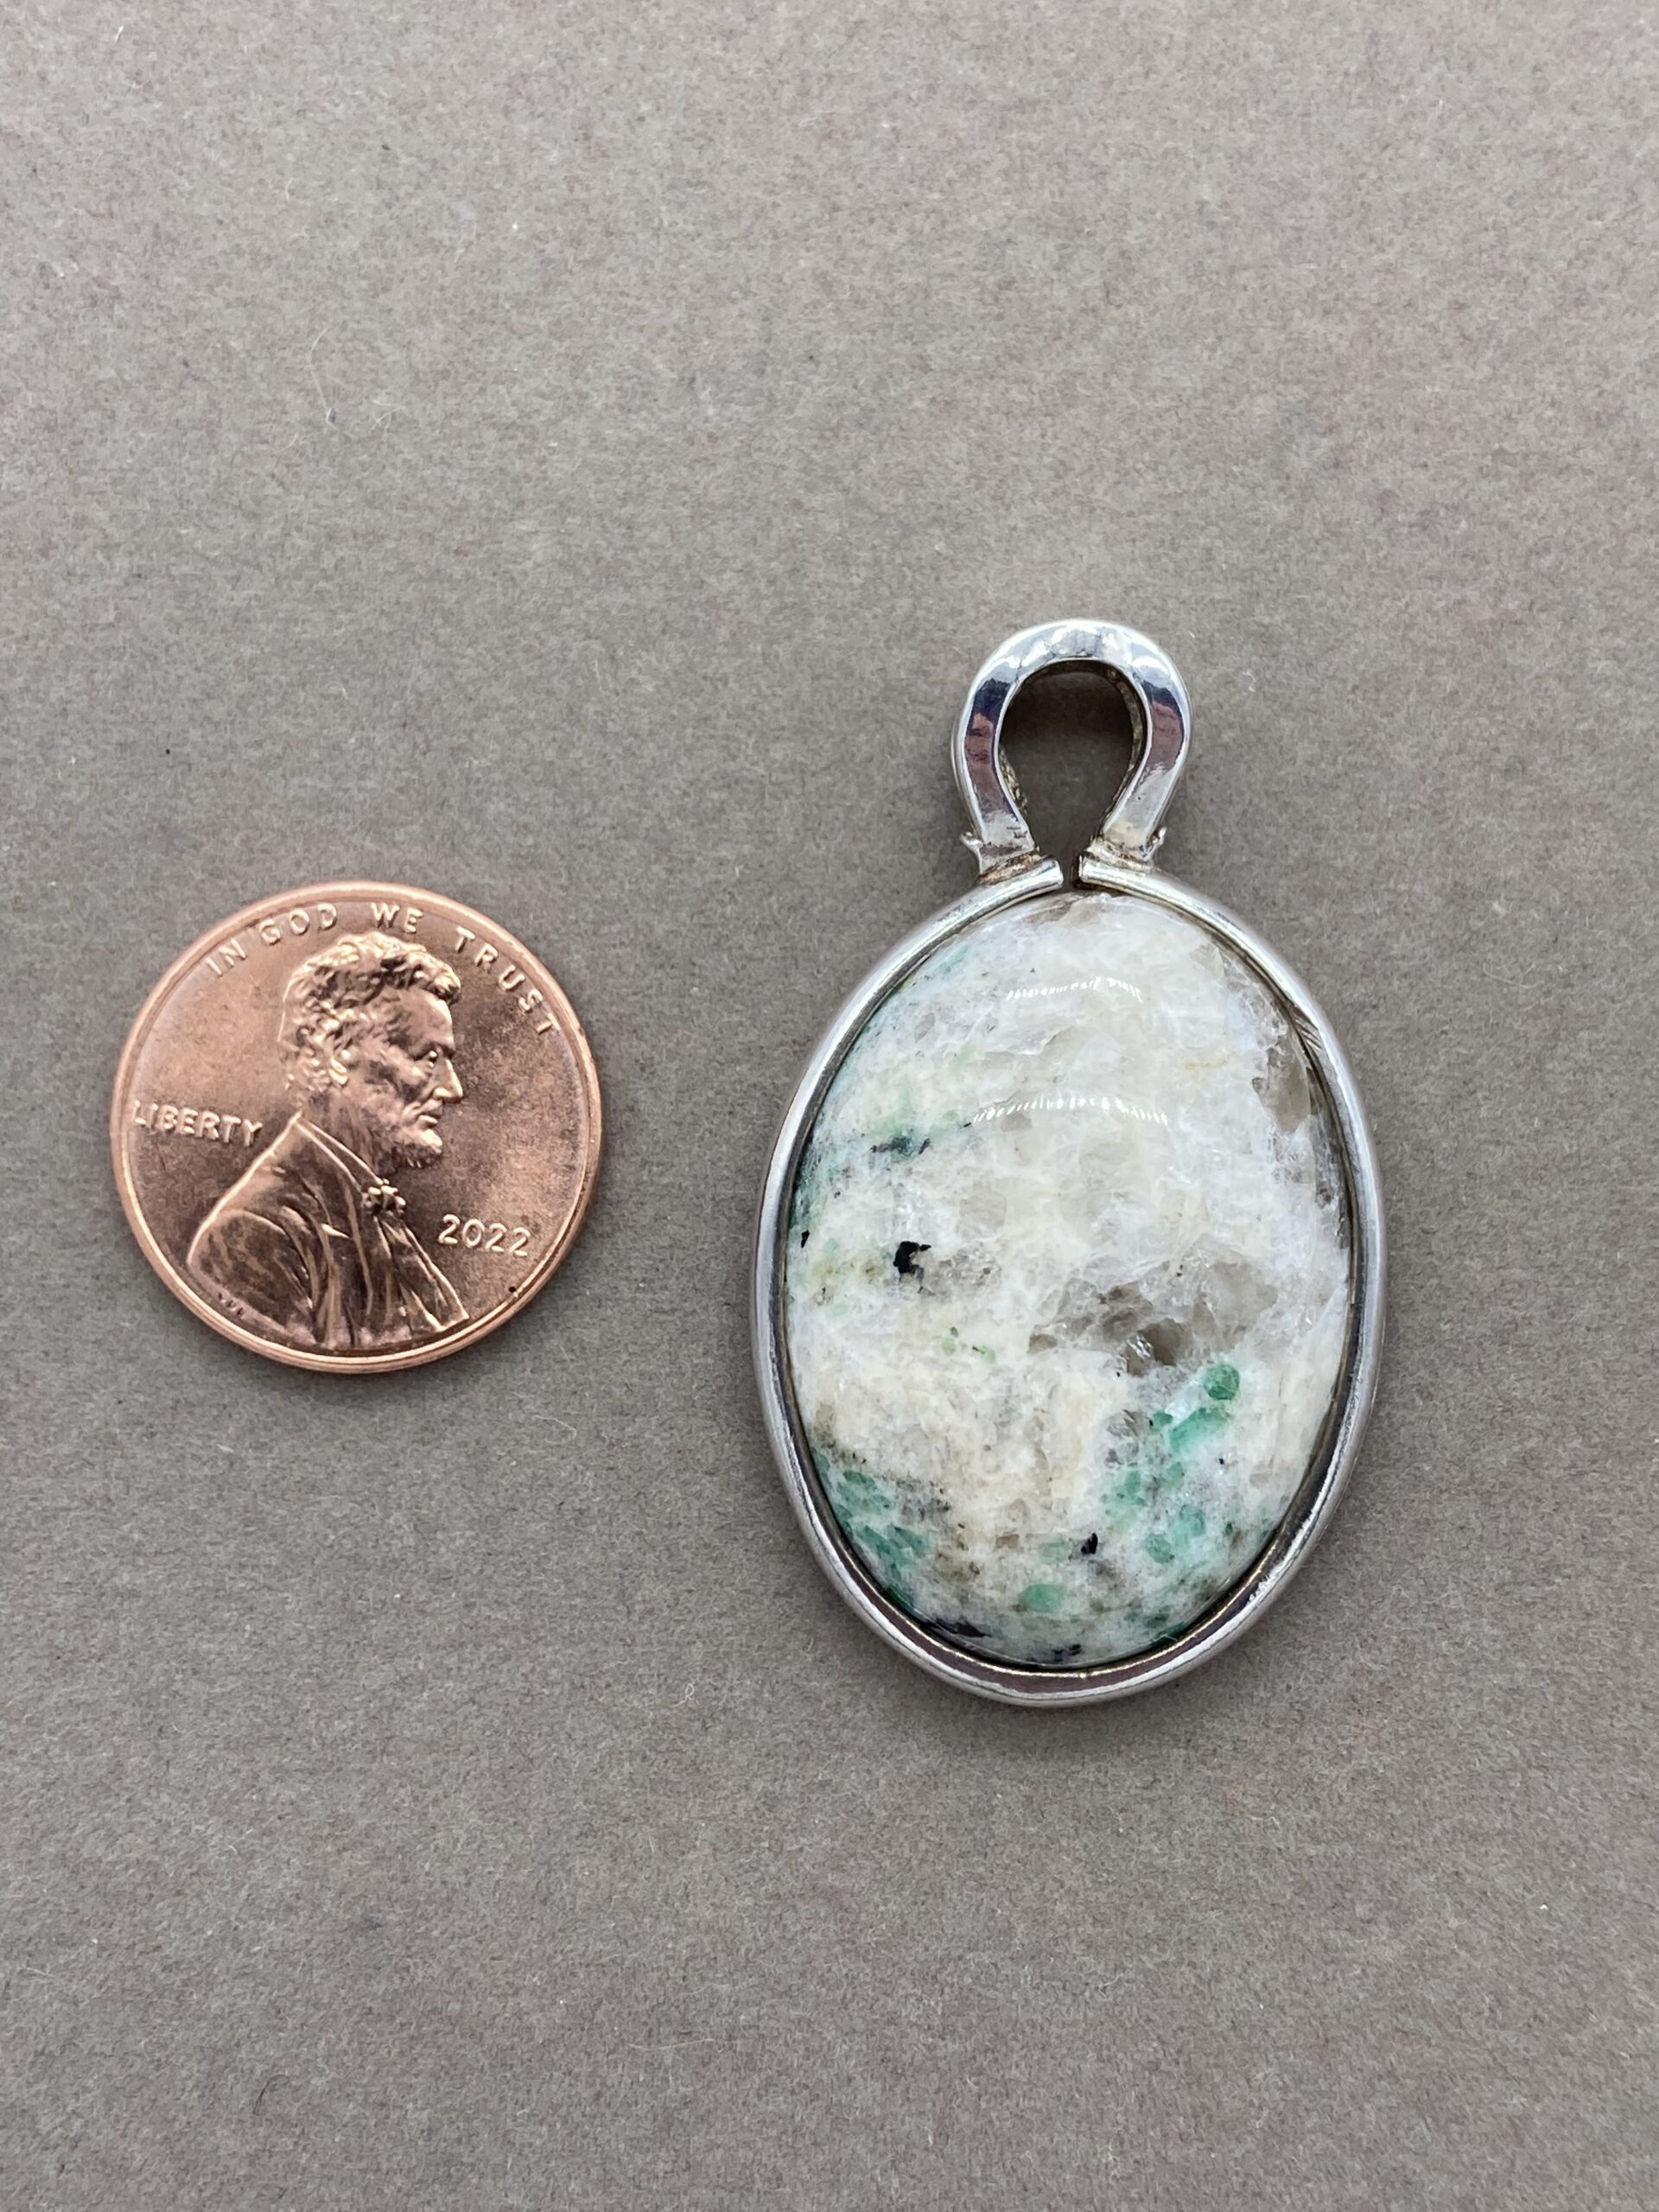 Crabtree Emerald pendant with penny